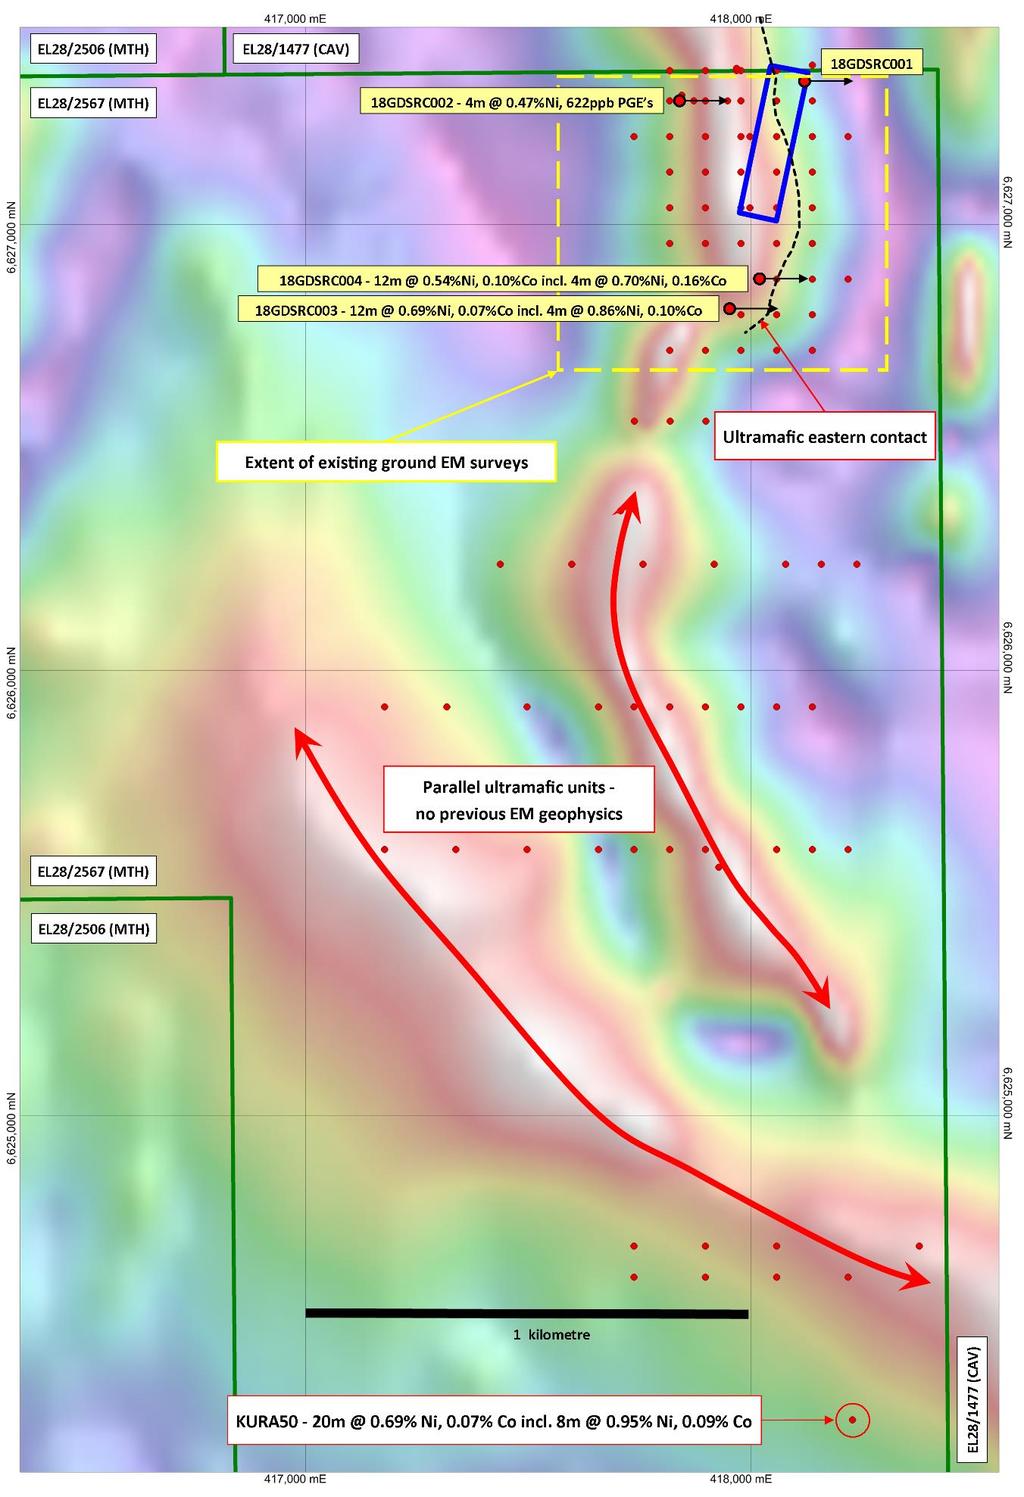 Figure 3: Kurnalpi Project northern target area showing priority down hole EM conductor plate (blue outline), extent of ground EM surveys and ultramafic